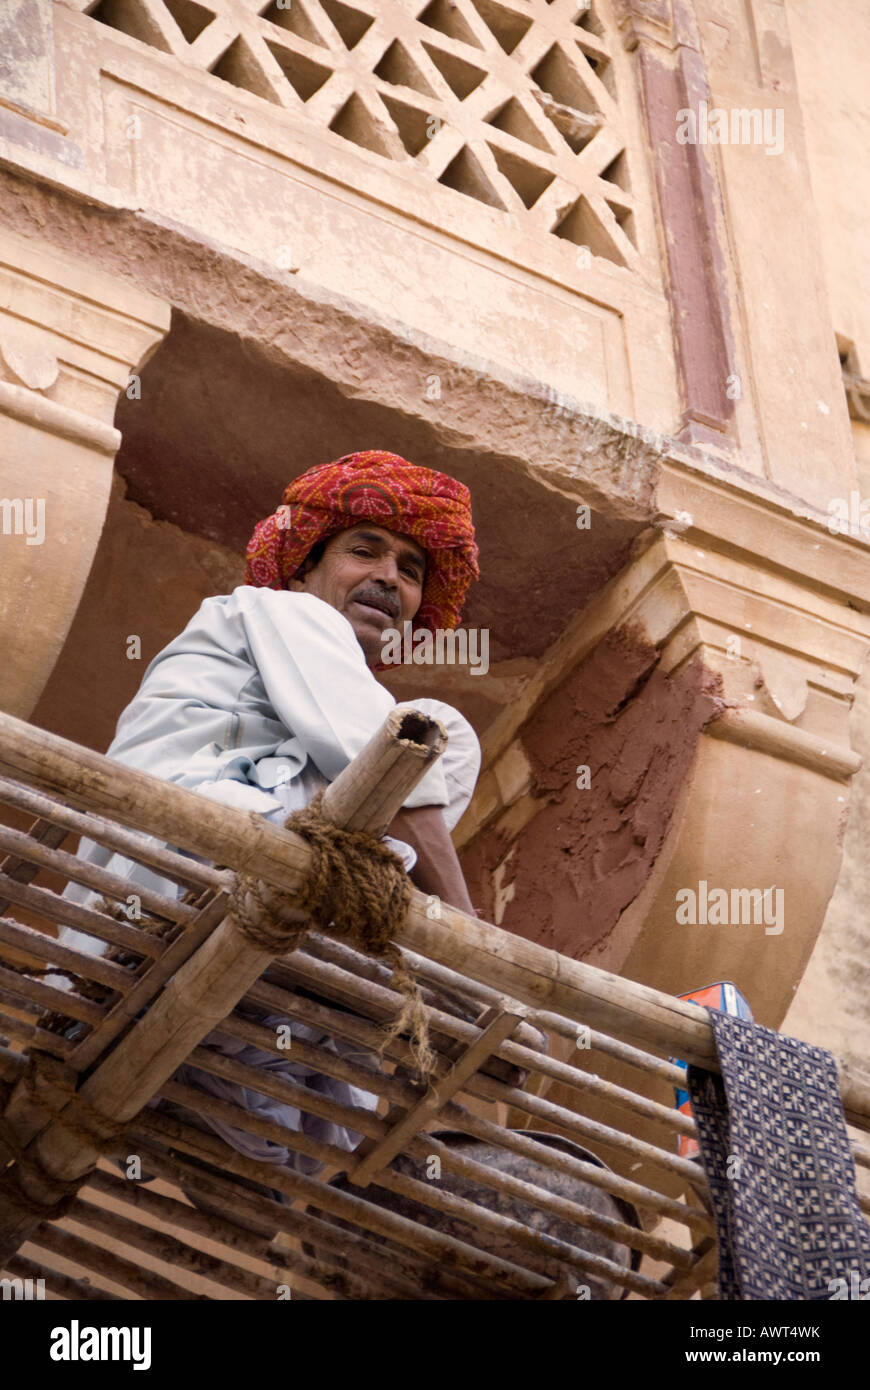 Turbaned plasterer repairs a building on scaffolding in Jaipur, India. Stock Photo